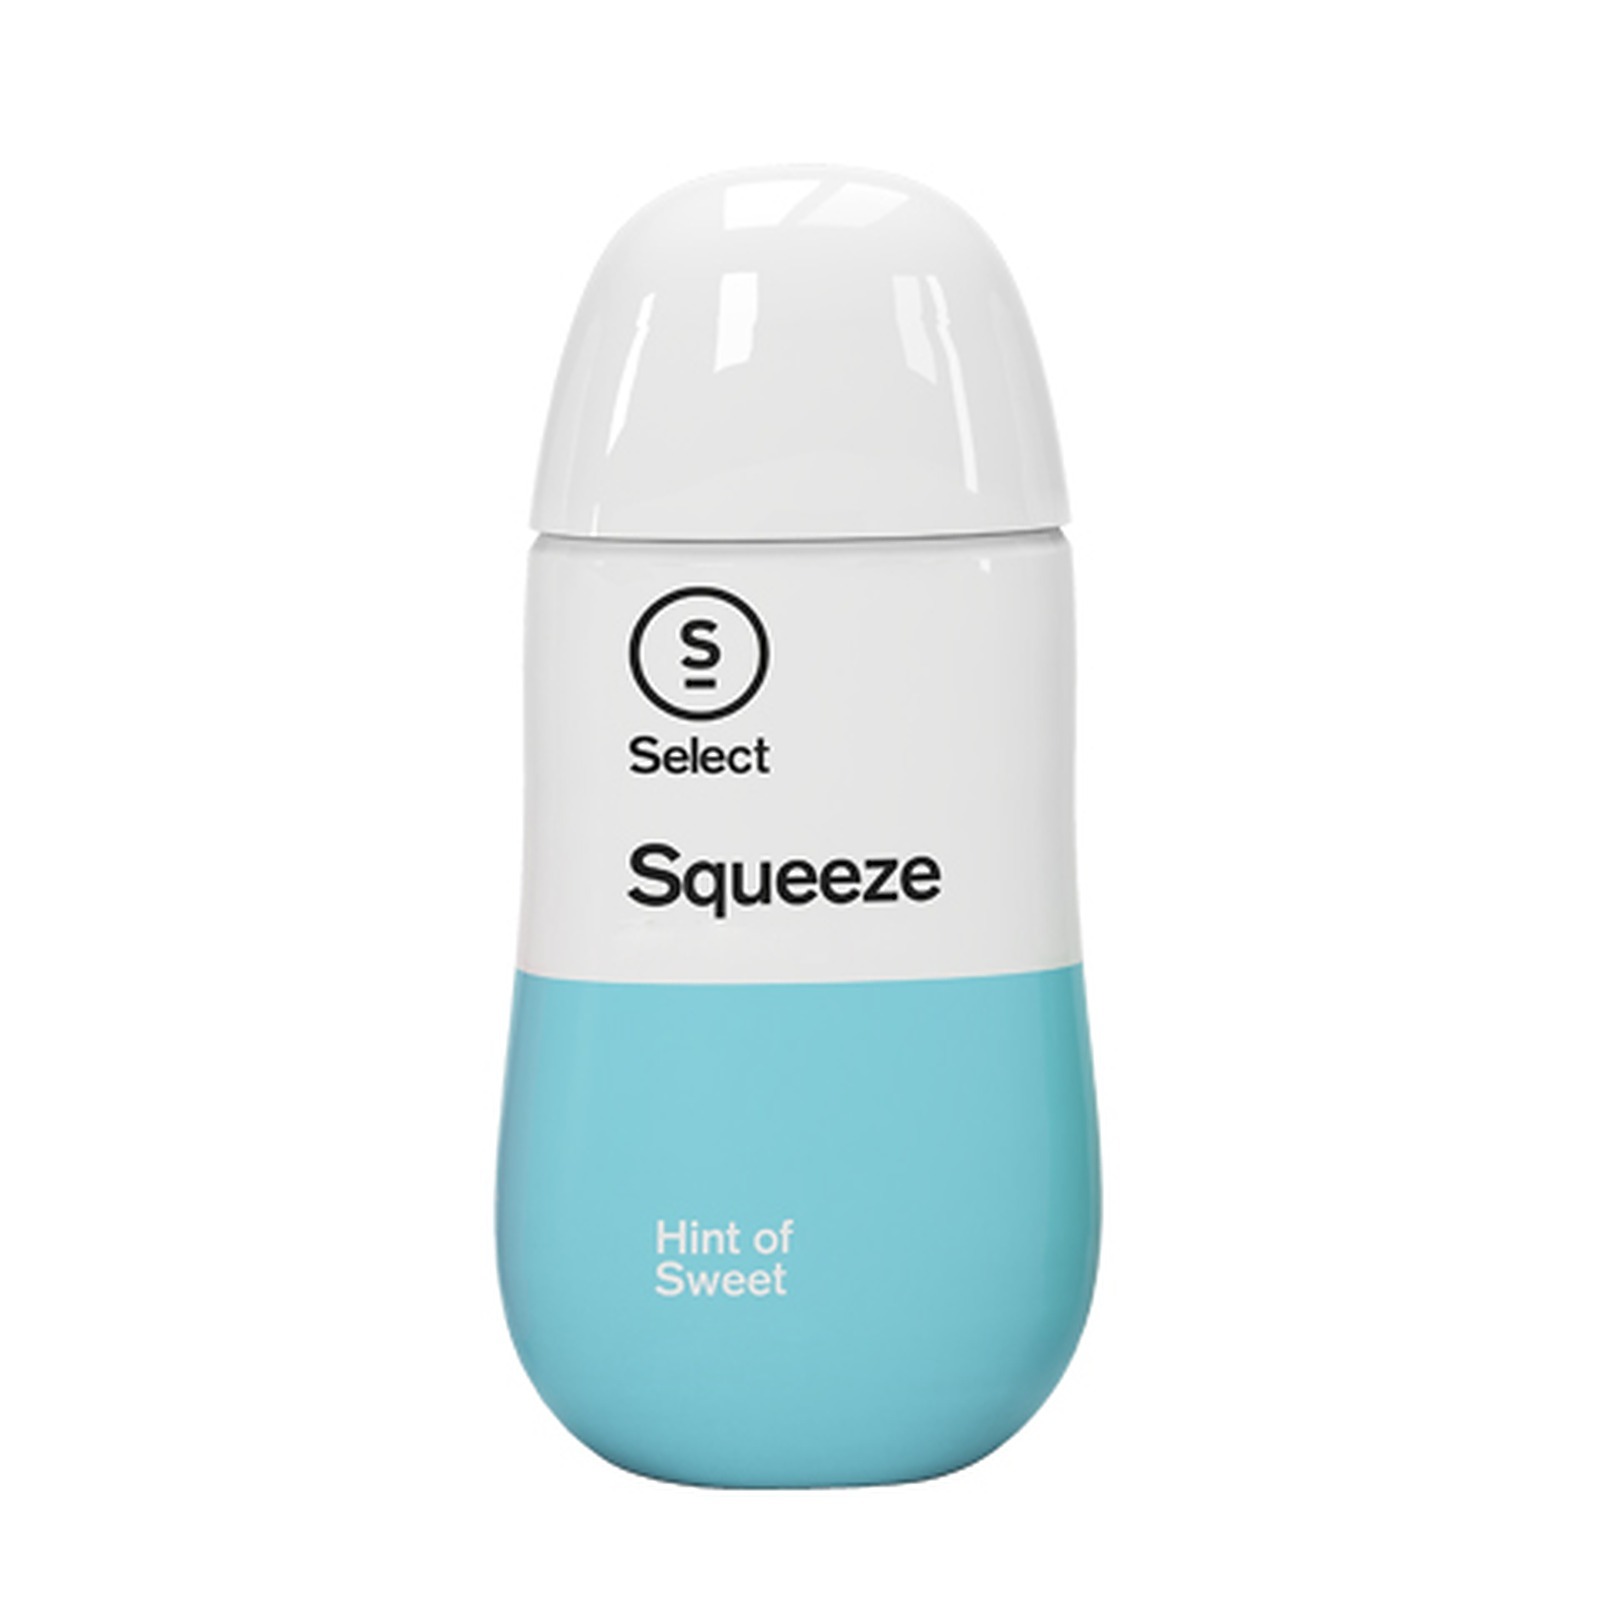 Select Squeeze 100mg Hint of Sweet - Hybrid